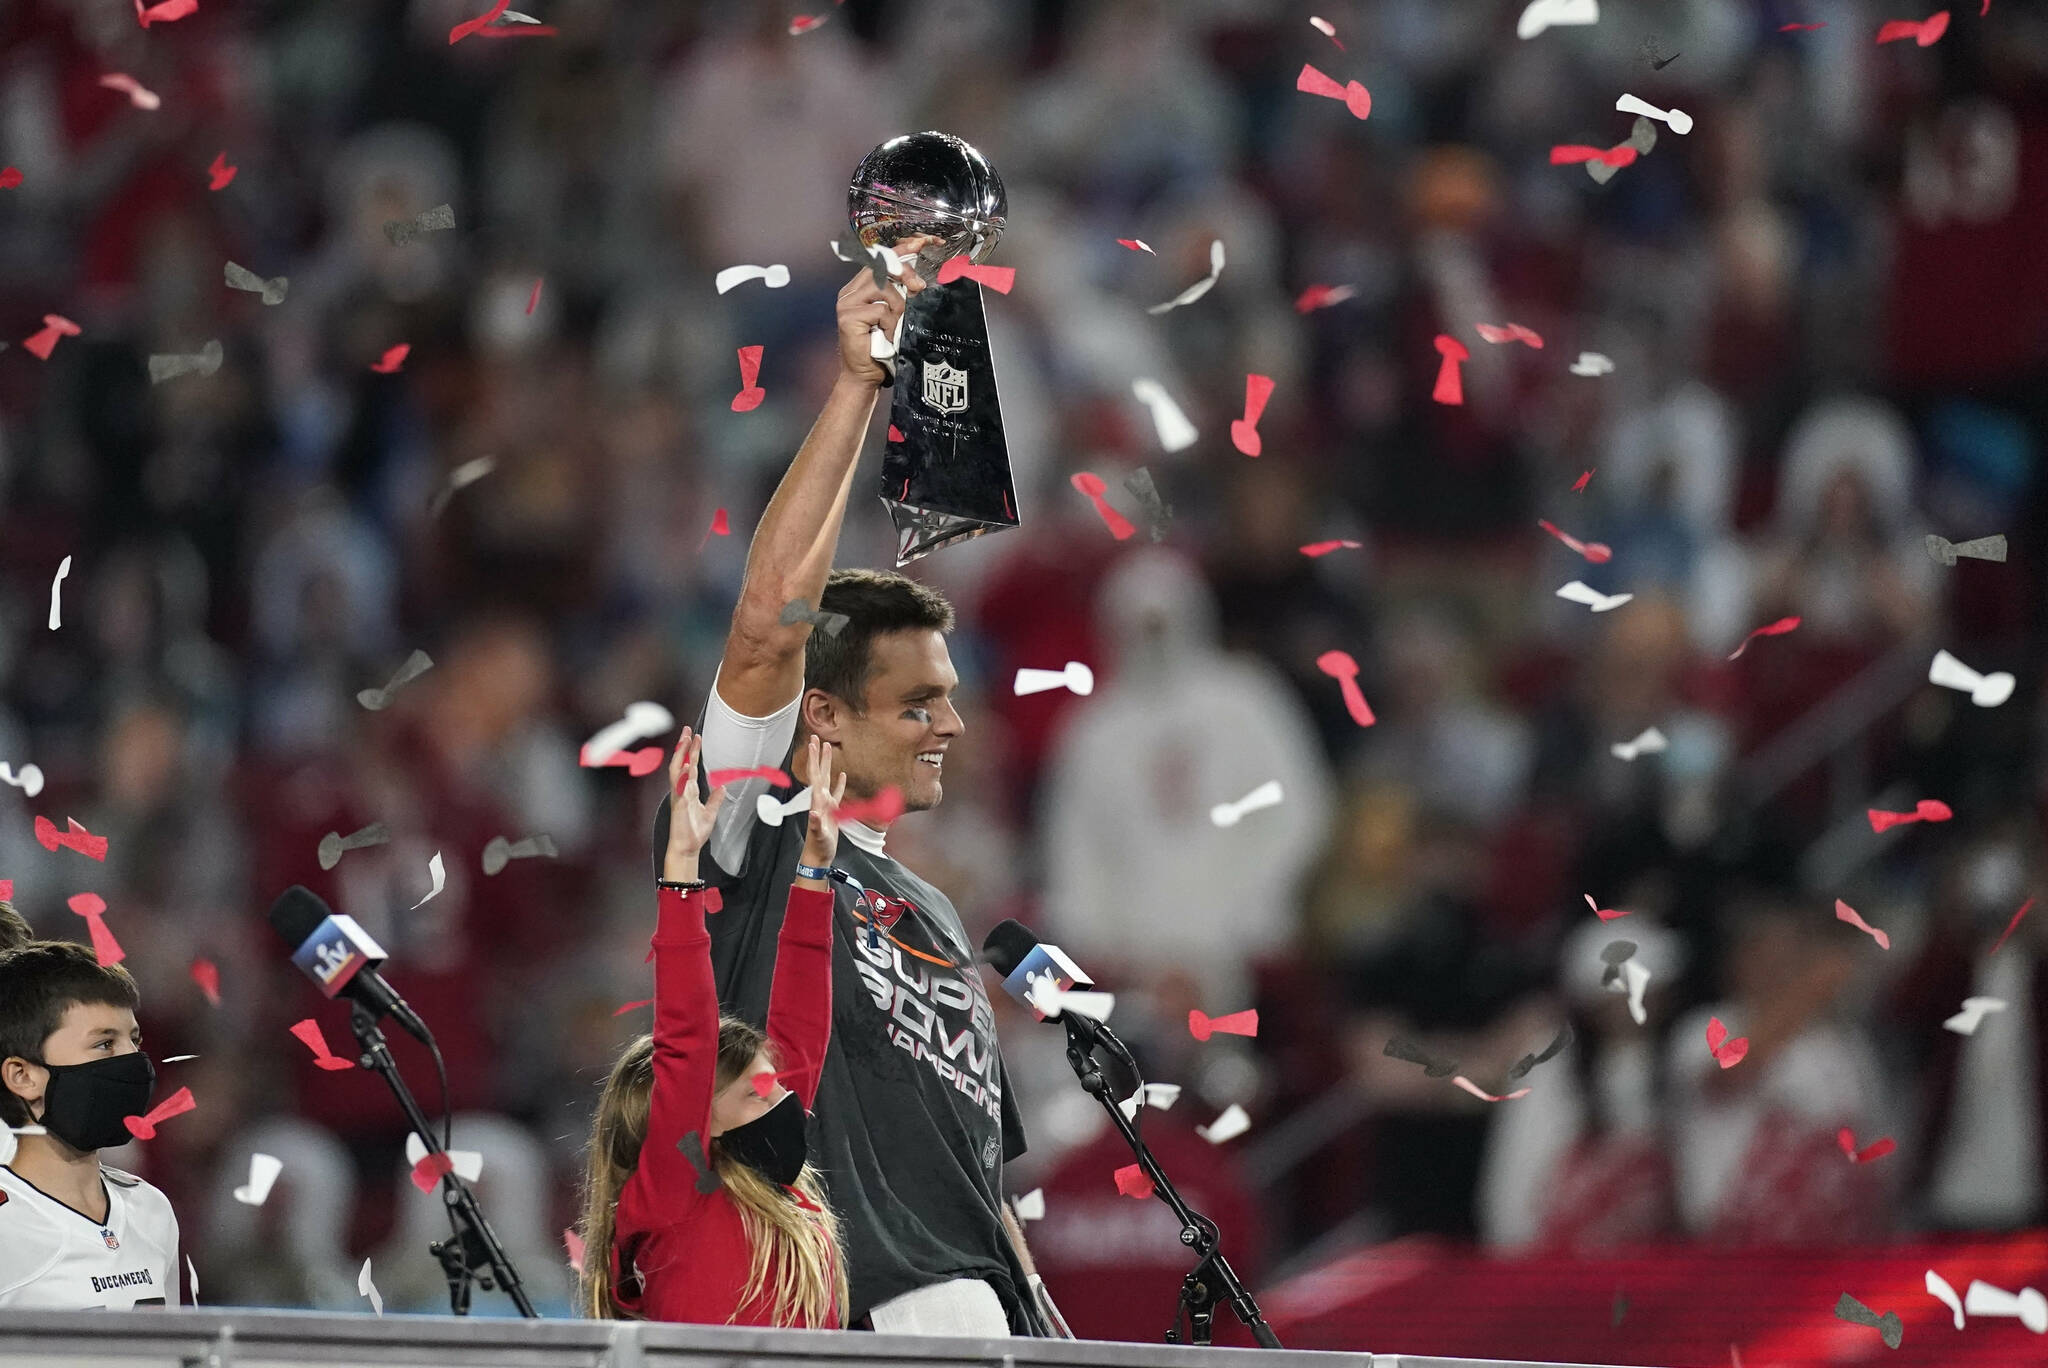 Tampa Bay Buccaneers quarterback Tom Brady holds up the Vince Lombardi trophy after defeating the Kansas City Chiefs in the NFL Super Bowl 55 football game Sunday, Feb. 7, 2021, in Tampa, Fla. The Buccaneers defeated the Chiefs 31-9 to win the Super Bowl. (AP Photo/Ashley Landis)